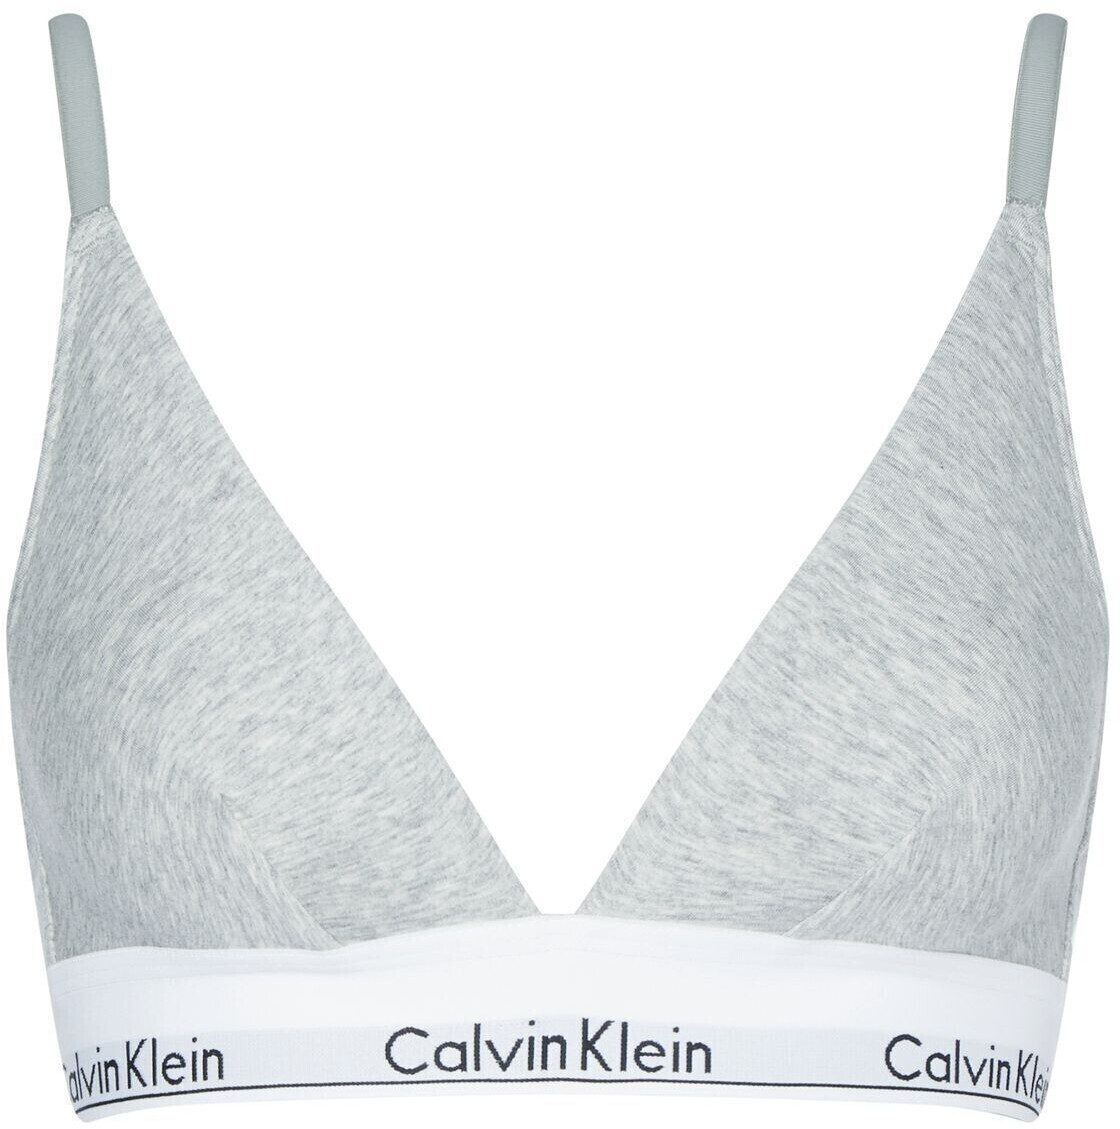 Buy Calvin Klein Triangle Bra Modern Cotton Unlined grey from £18.99  (Today) – Best Deals on